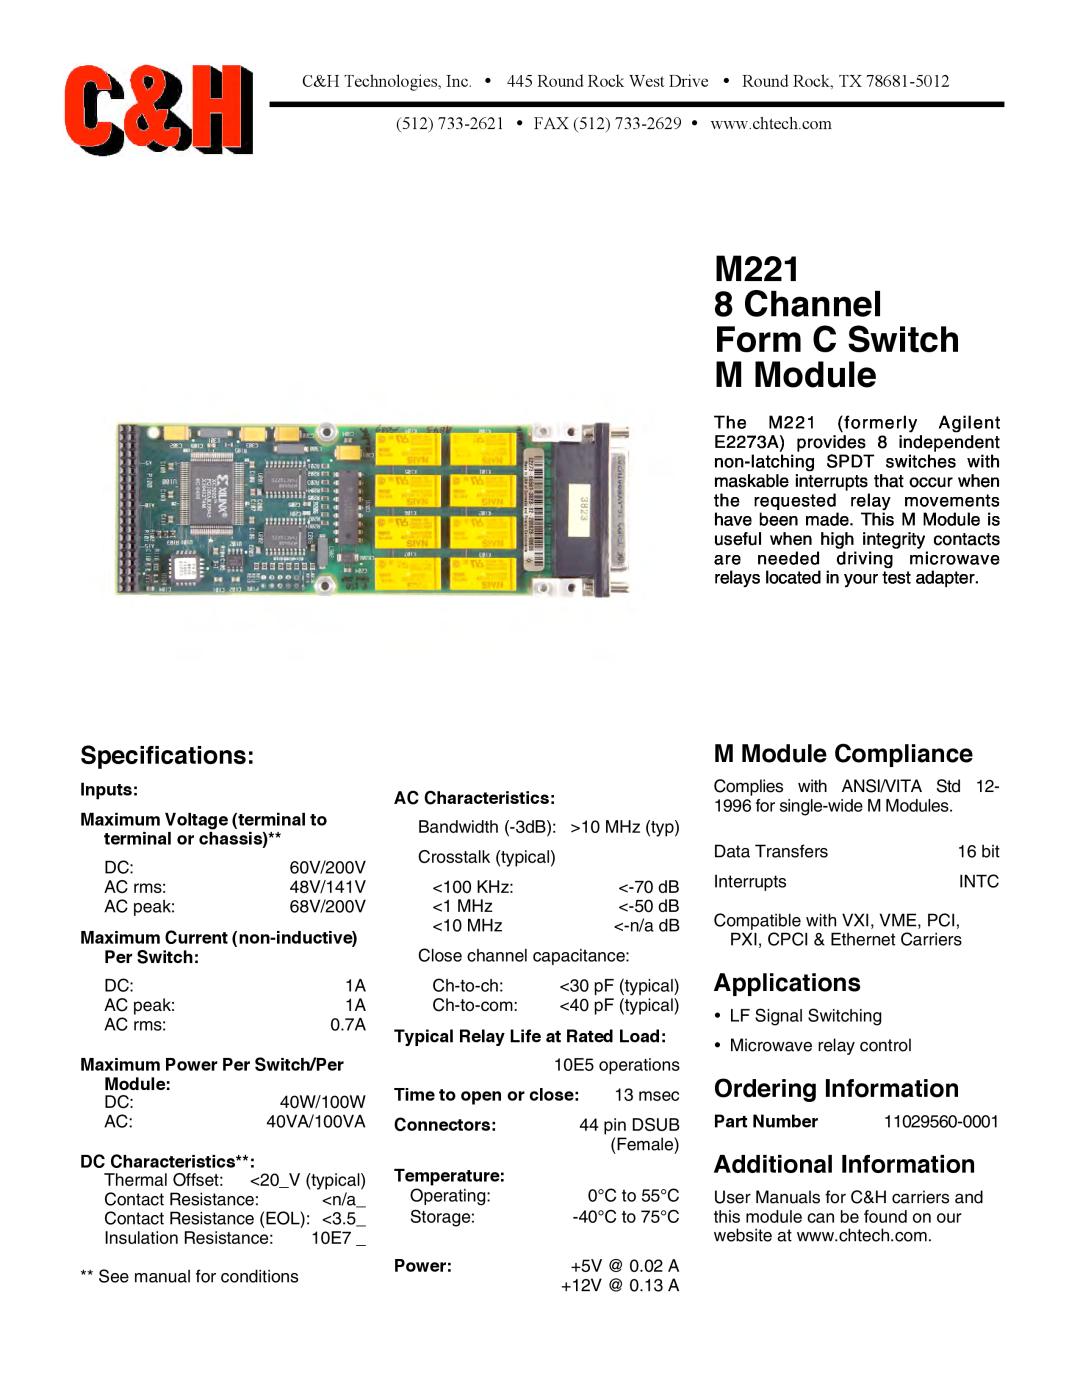 CH Tech specifications M221 8 Channel Form C Switch M Module, Specifications, M Module Compliance, Applications 